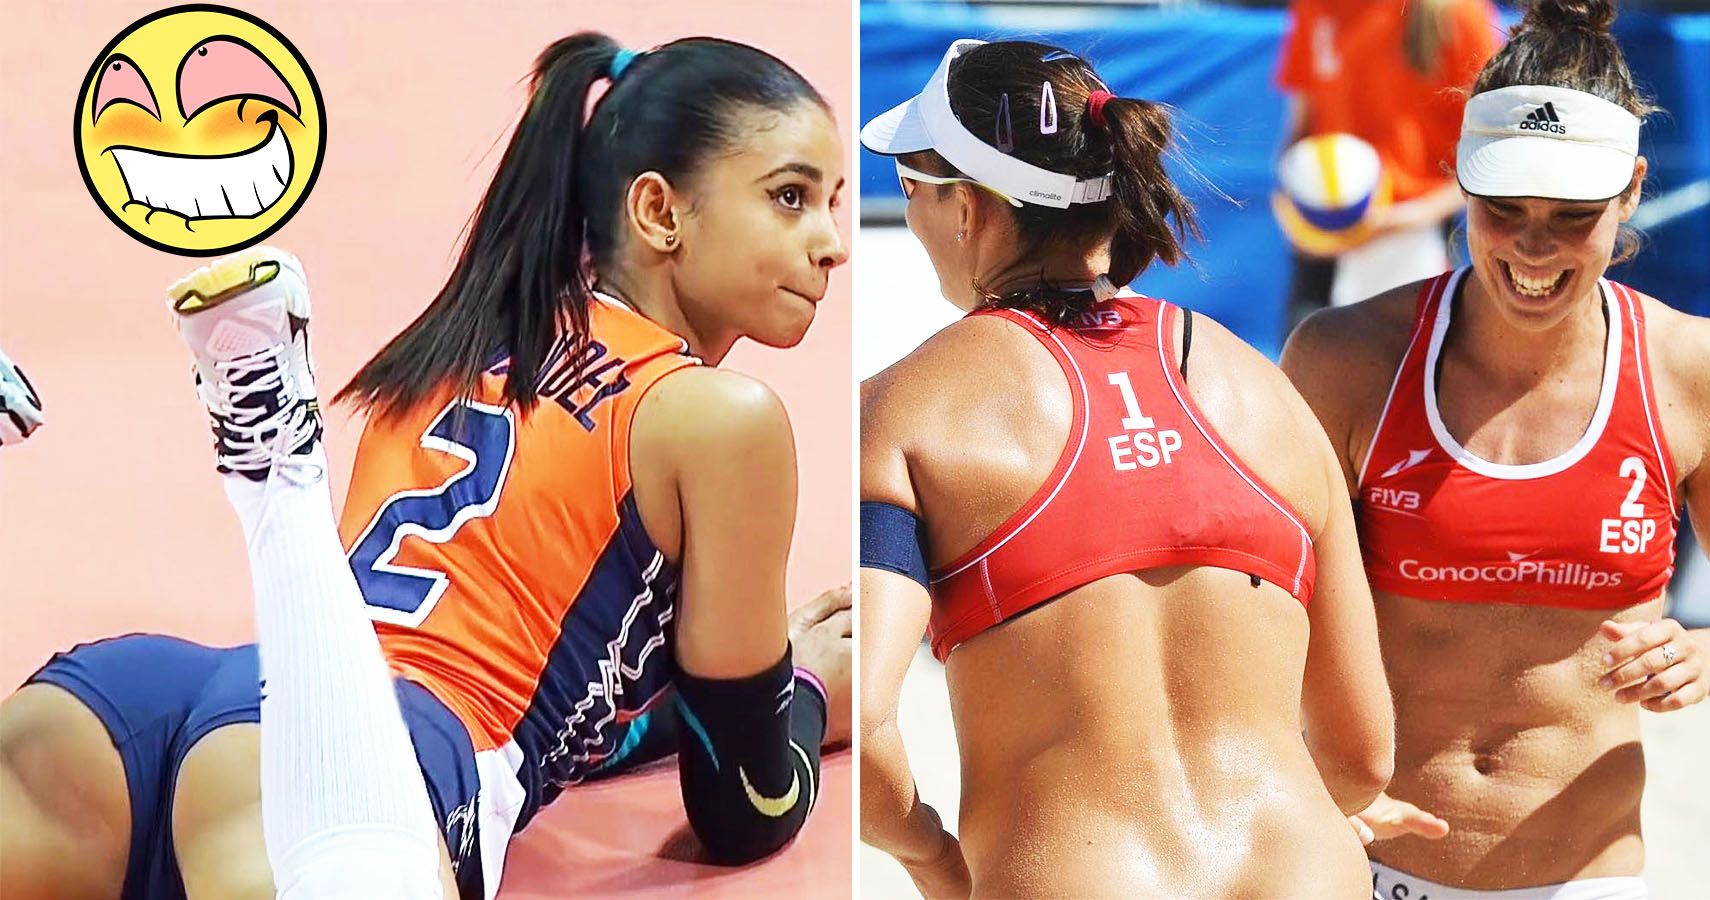 15 Times Female Volleyball Players Revealed More Than They Wanted To.